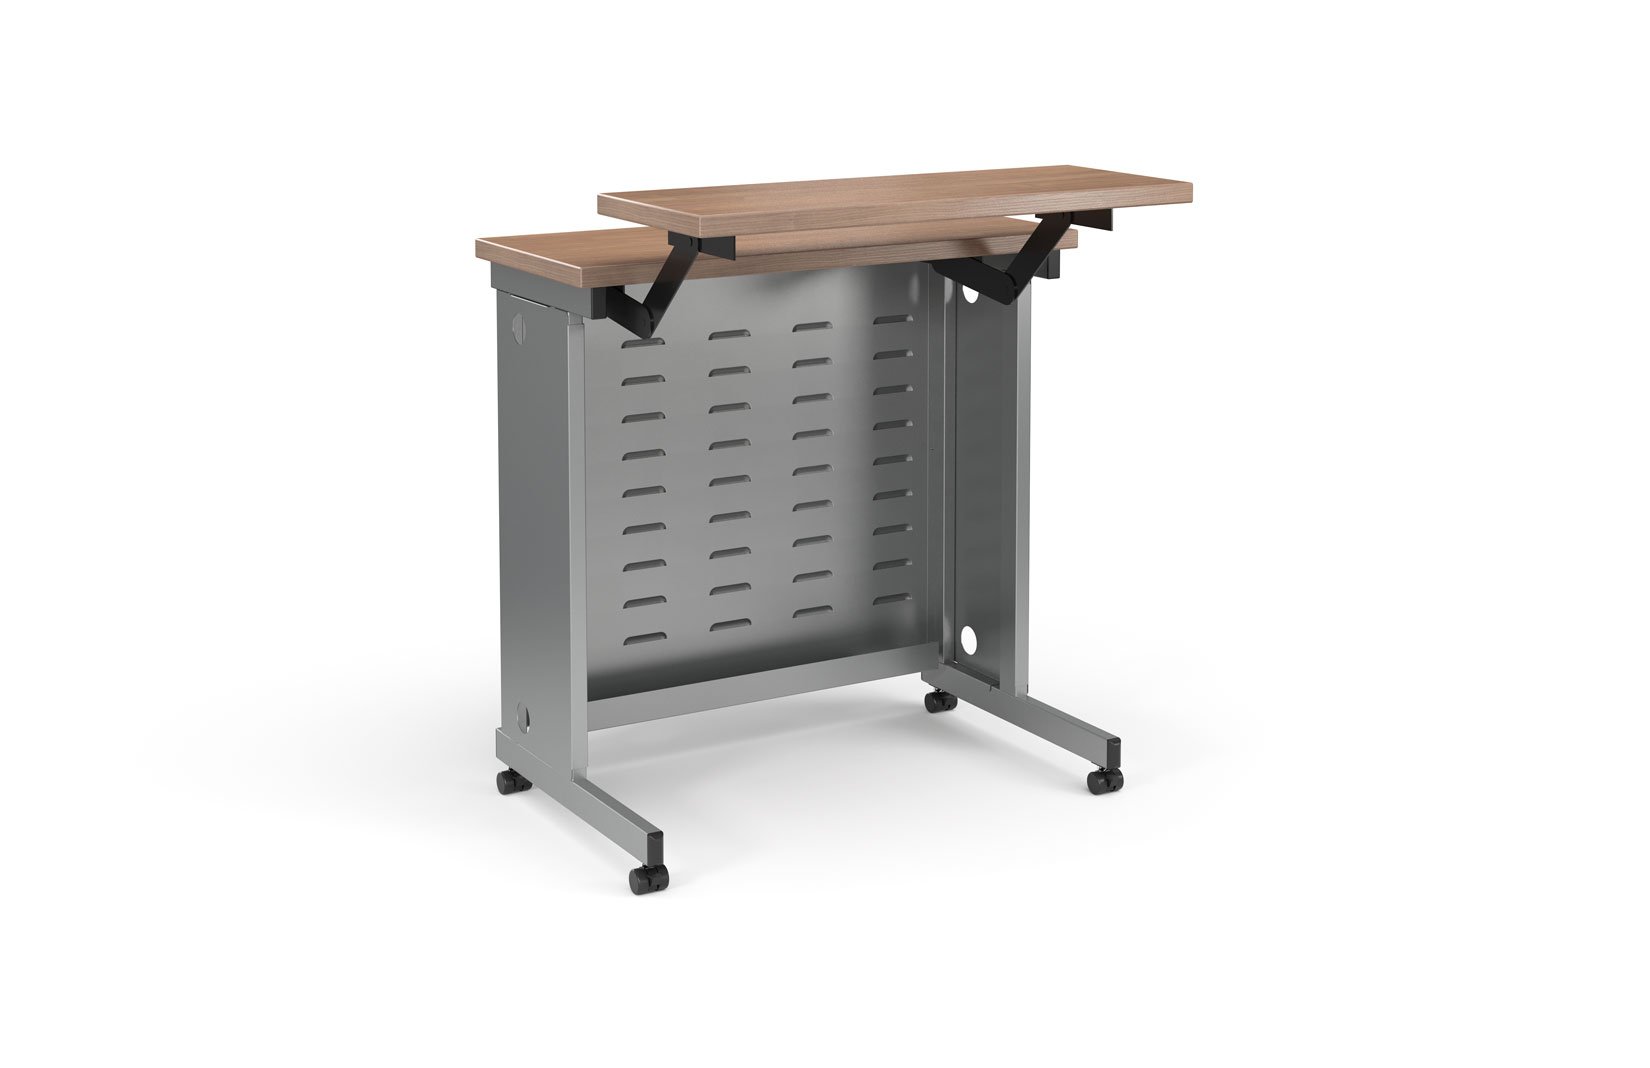 2022-08-15_Configurable_IT_Table_Lectern_Table_Raised_Front.jpg